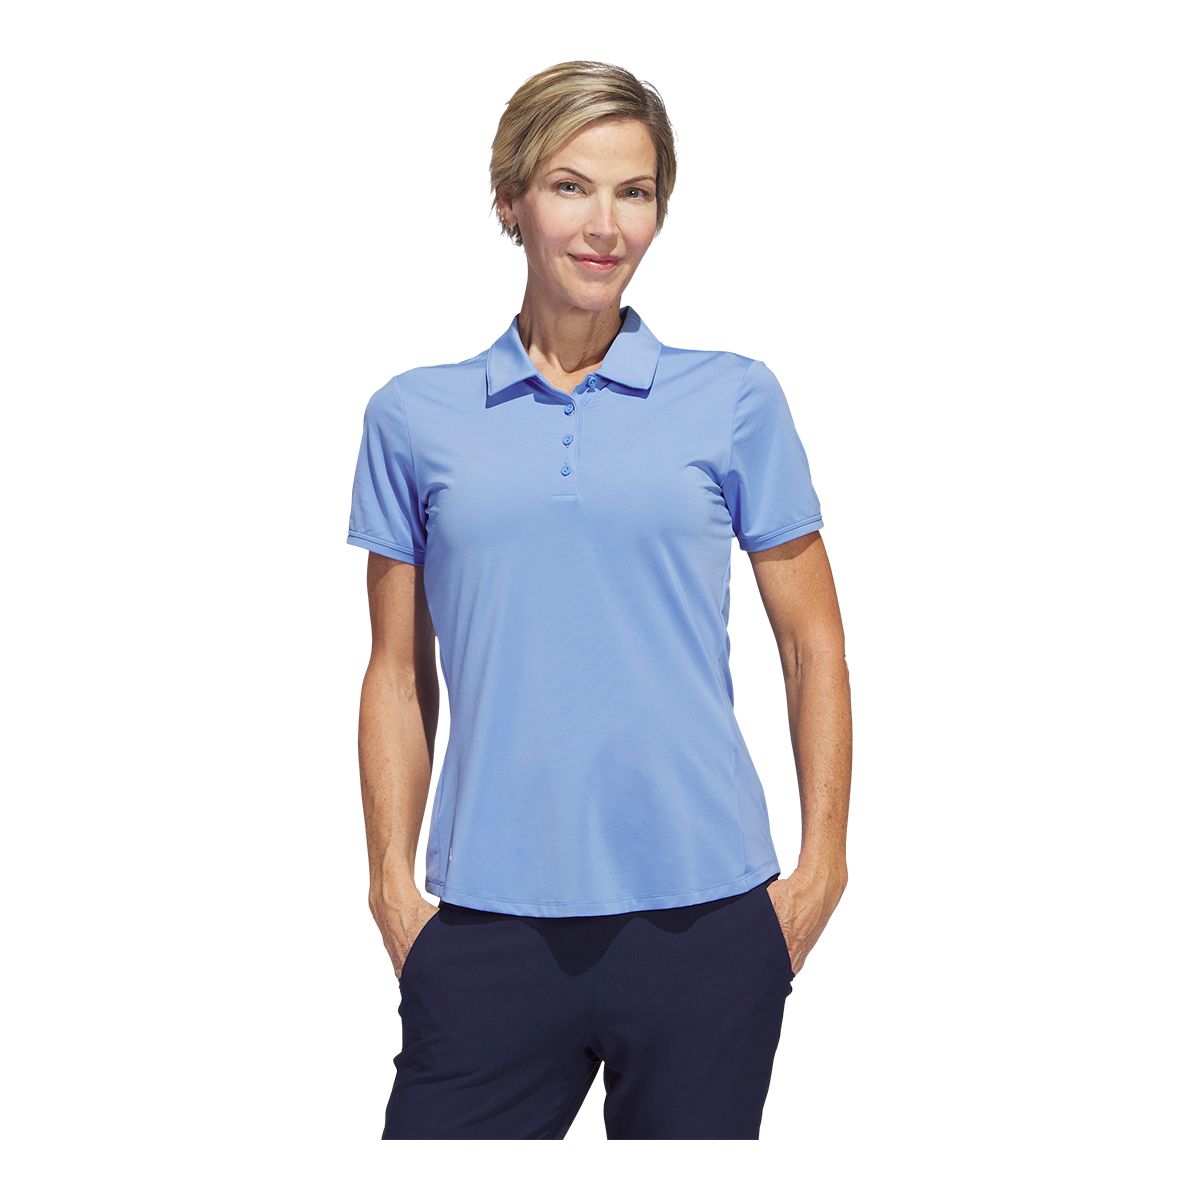 adidas Golf Women's Ultimate 365 Solid Polo T Shirt